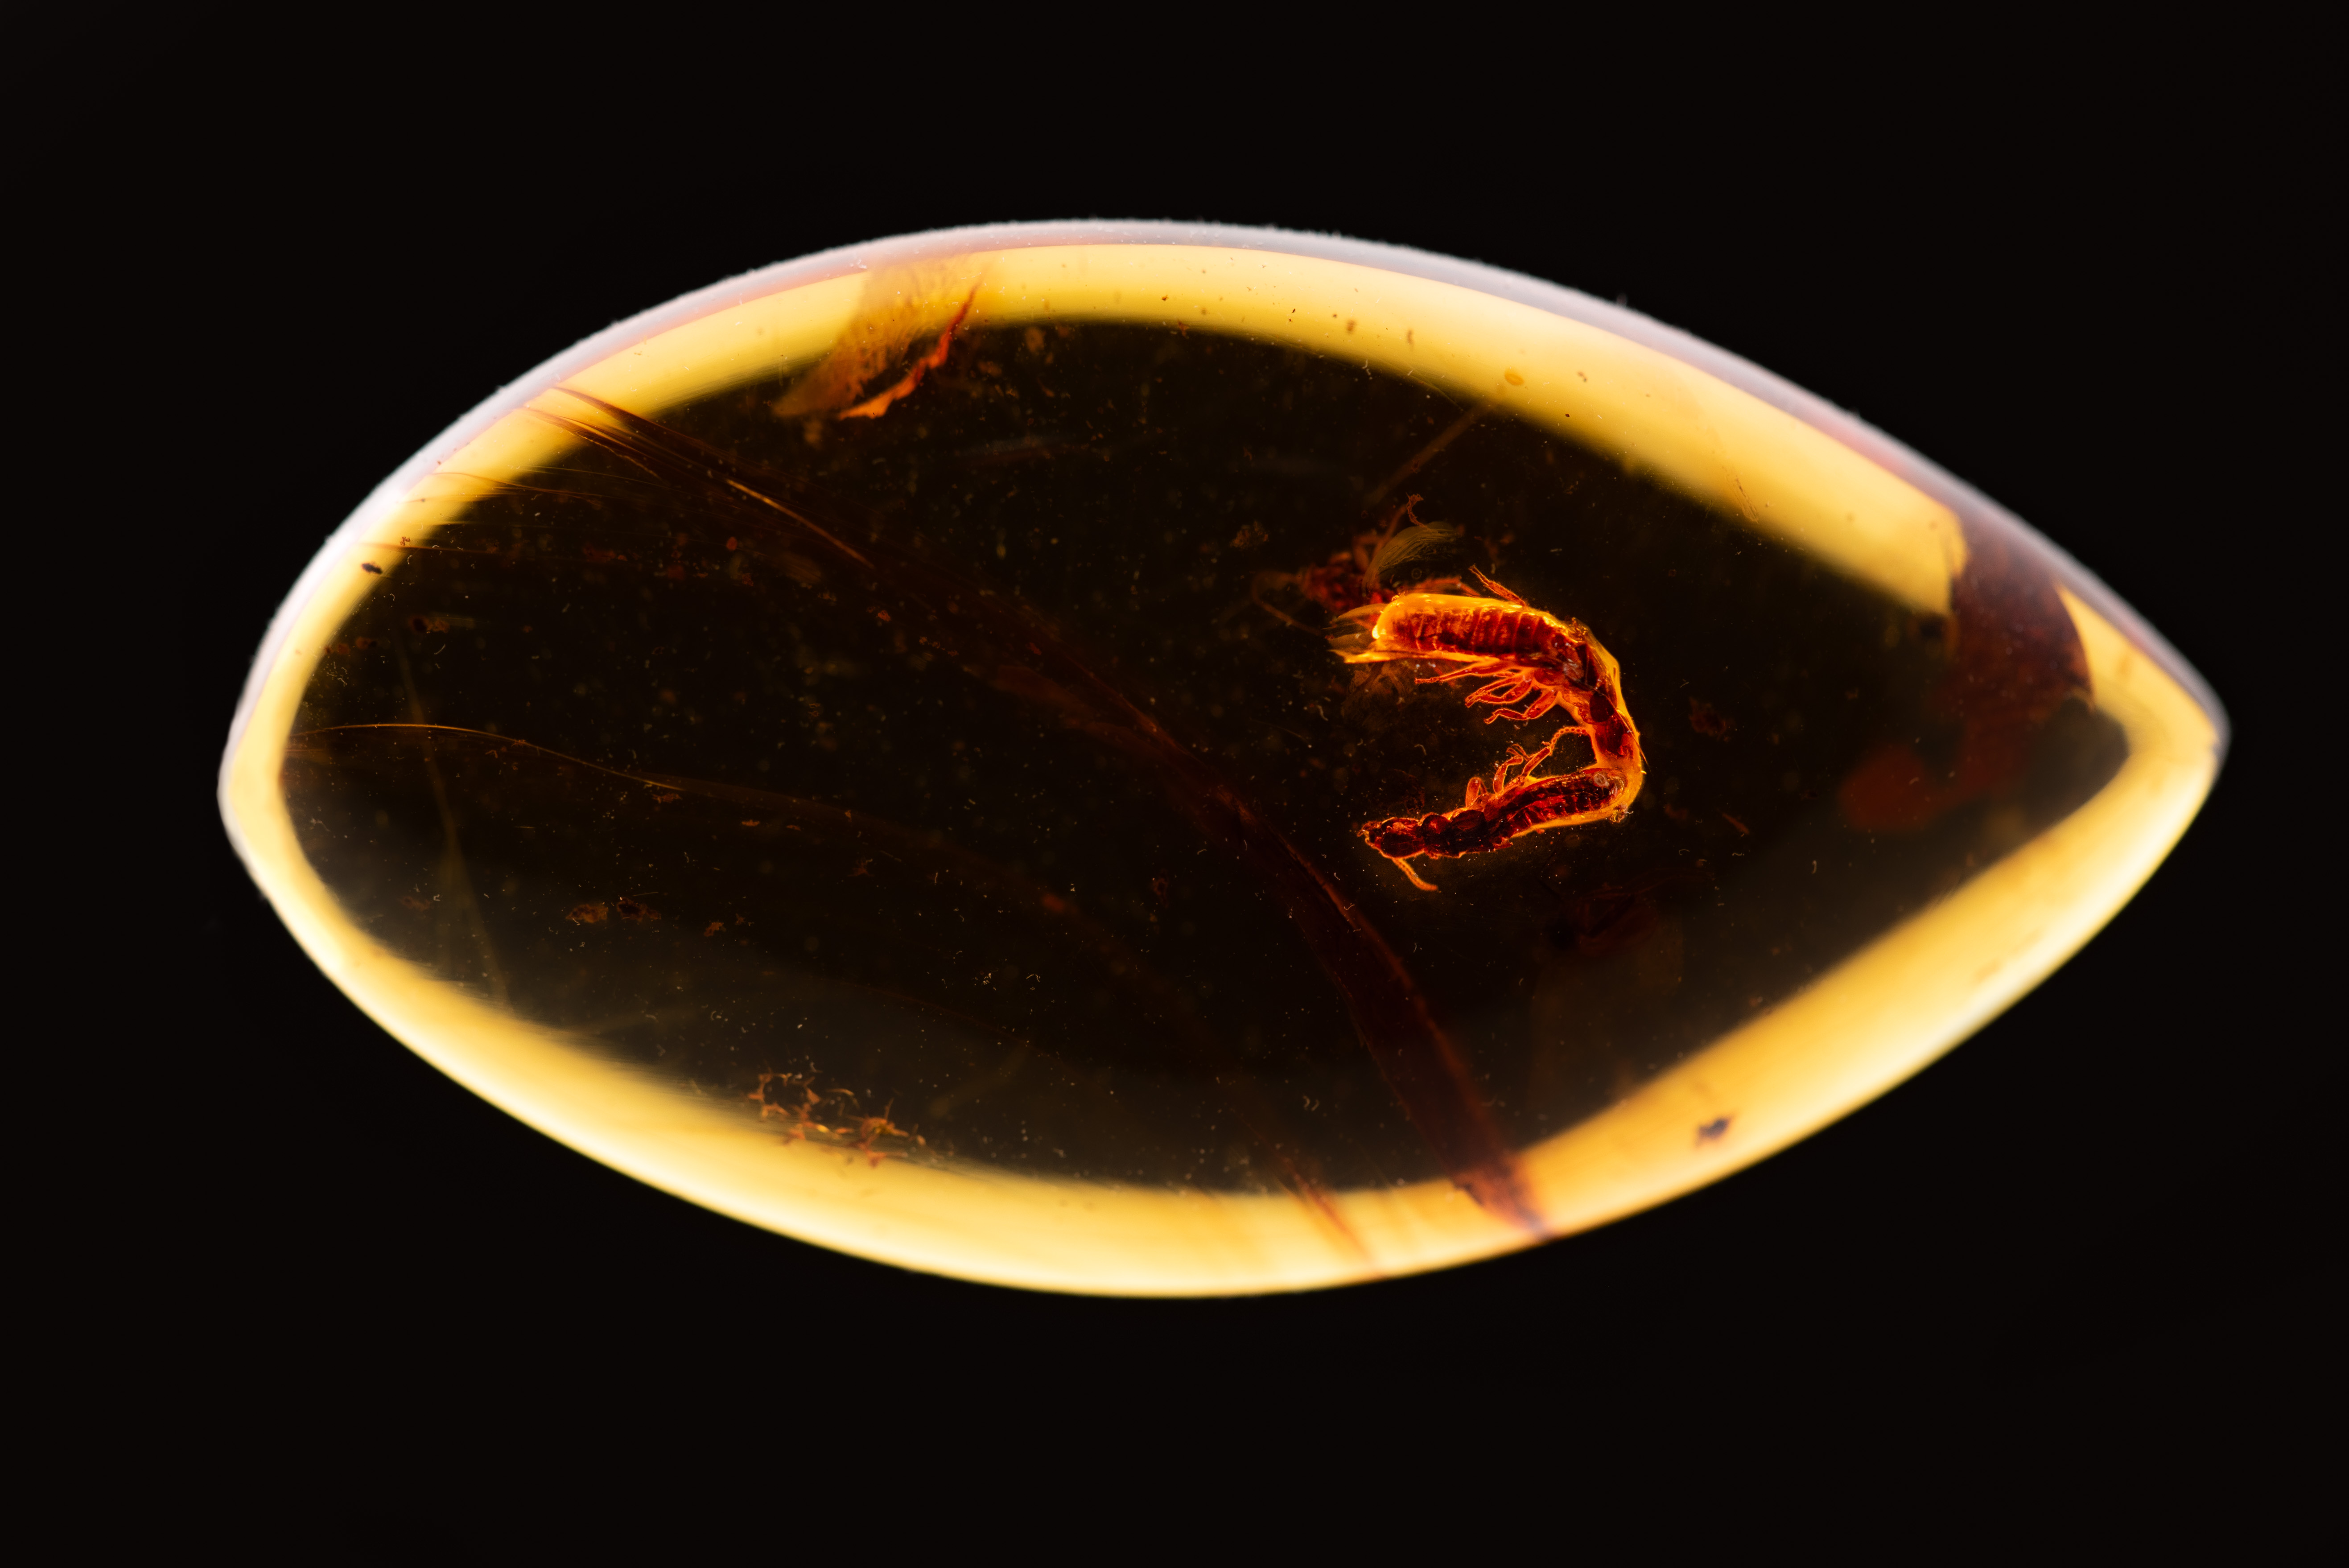 Extinct and extant termites reveal the fidelity of behavior fossilization in amber